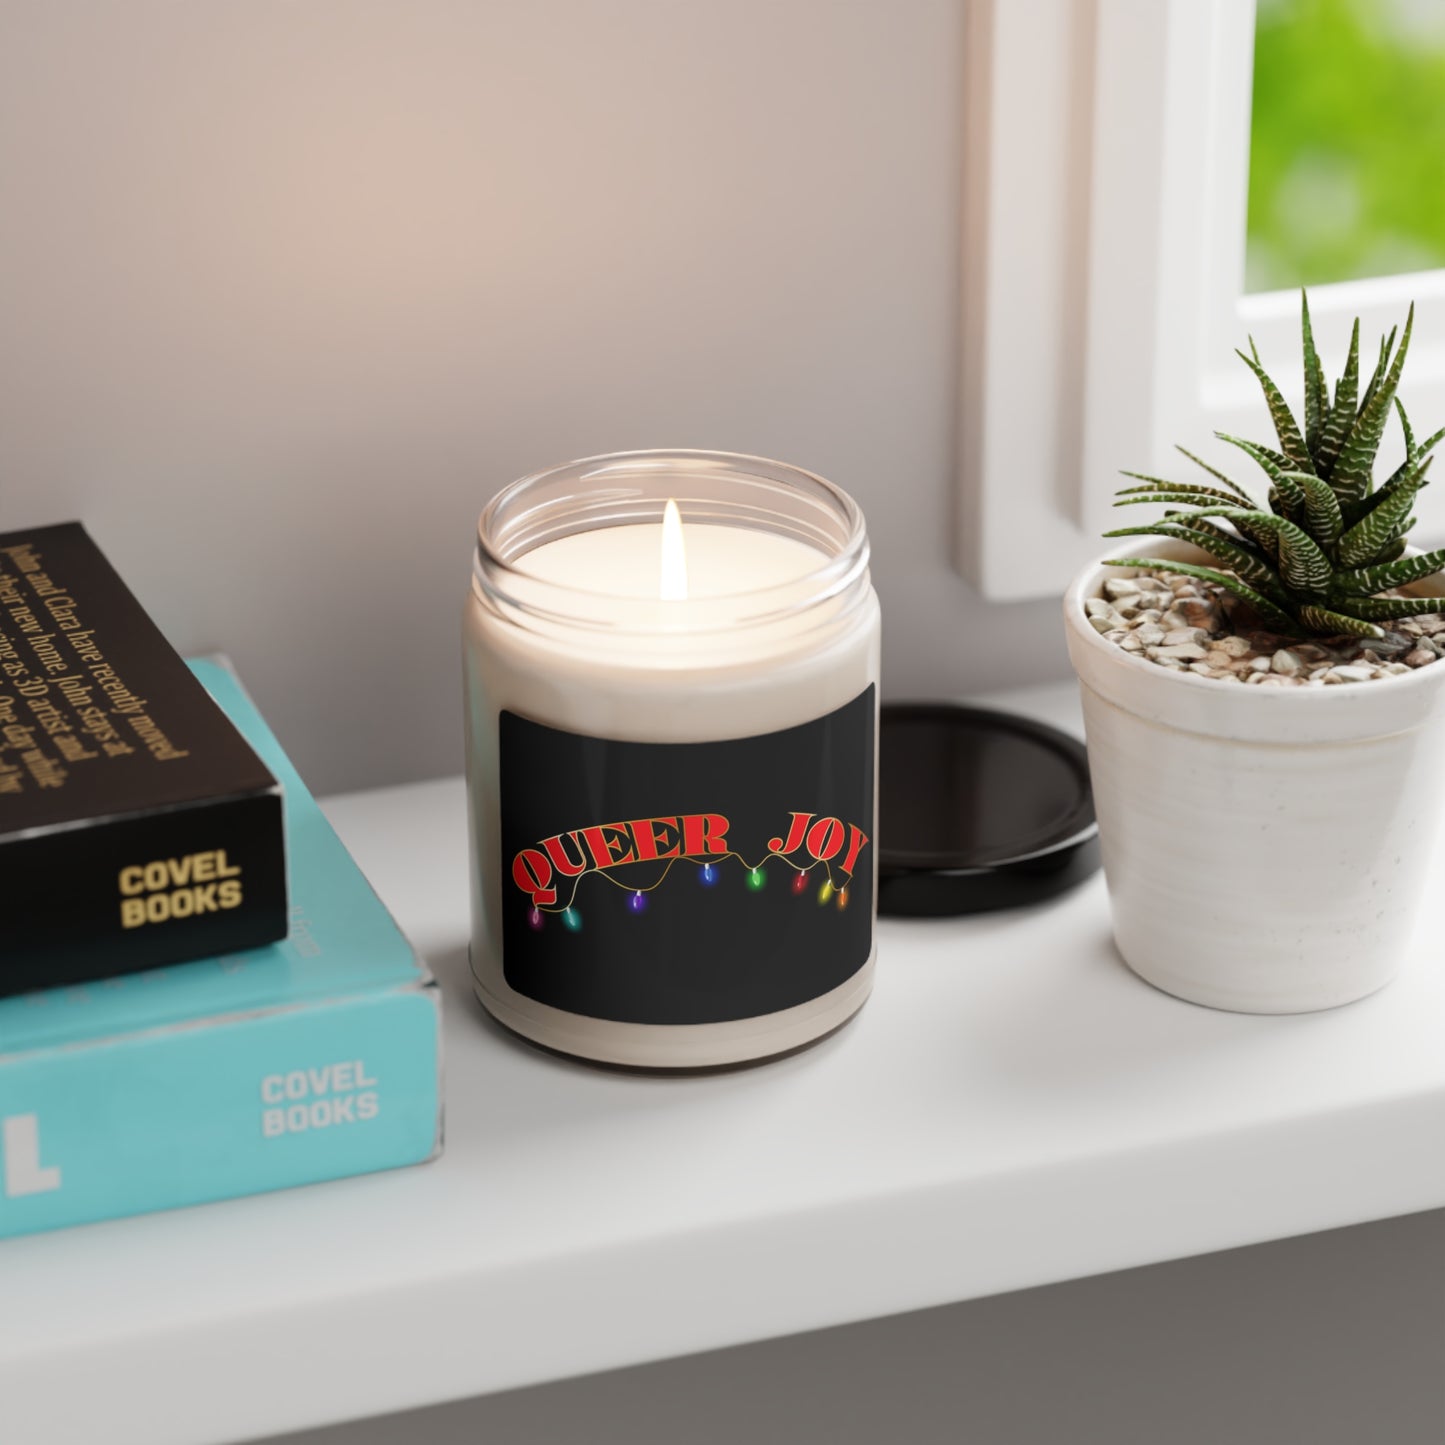 Queer Joy Candle